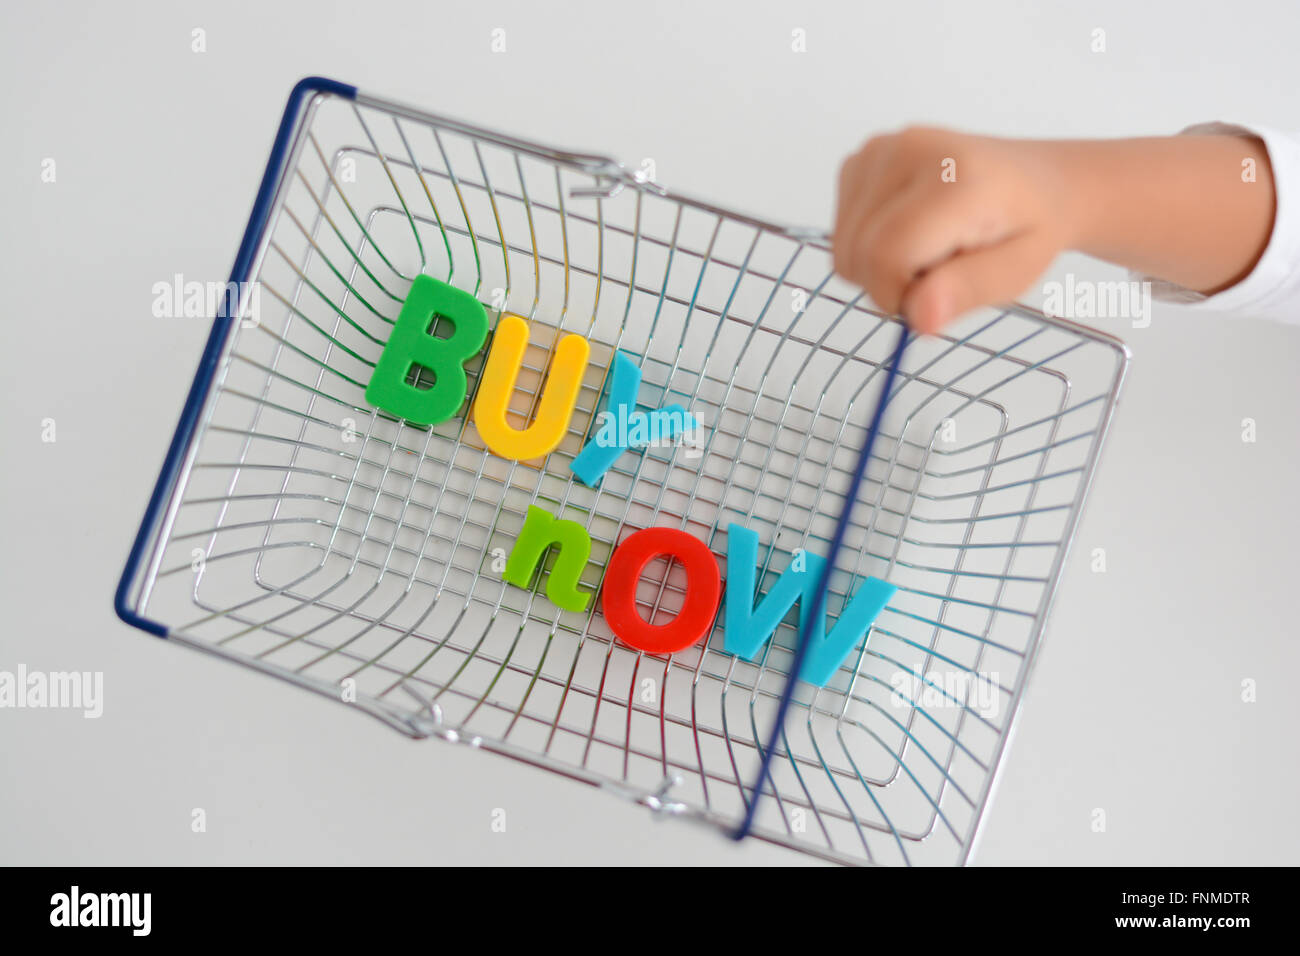 Buy now magnetic letters in a shopping basket Stock Photo